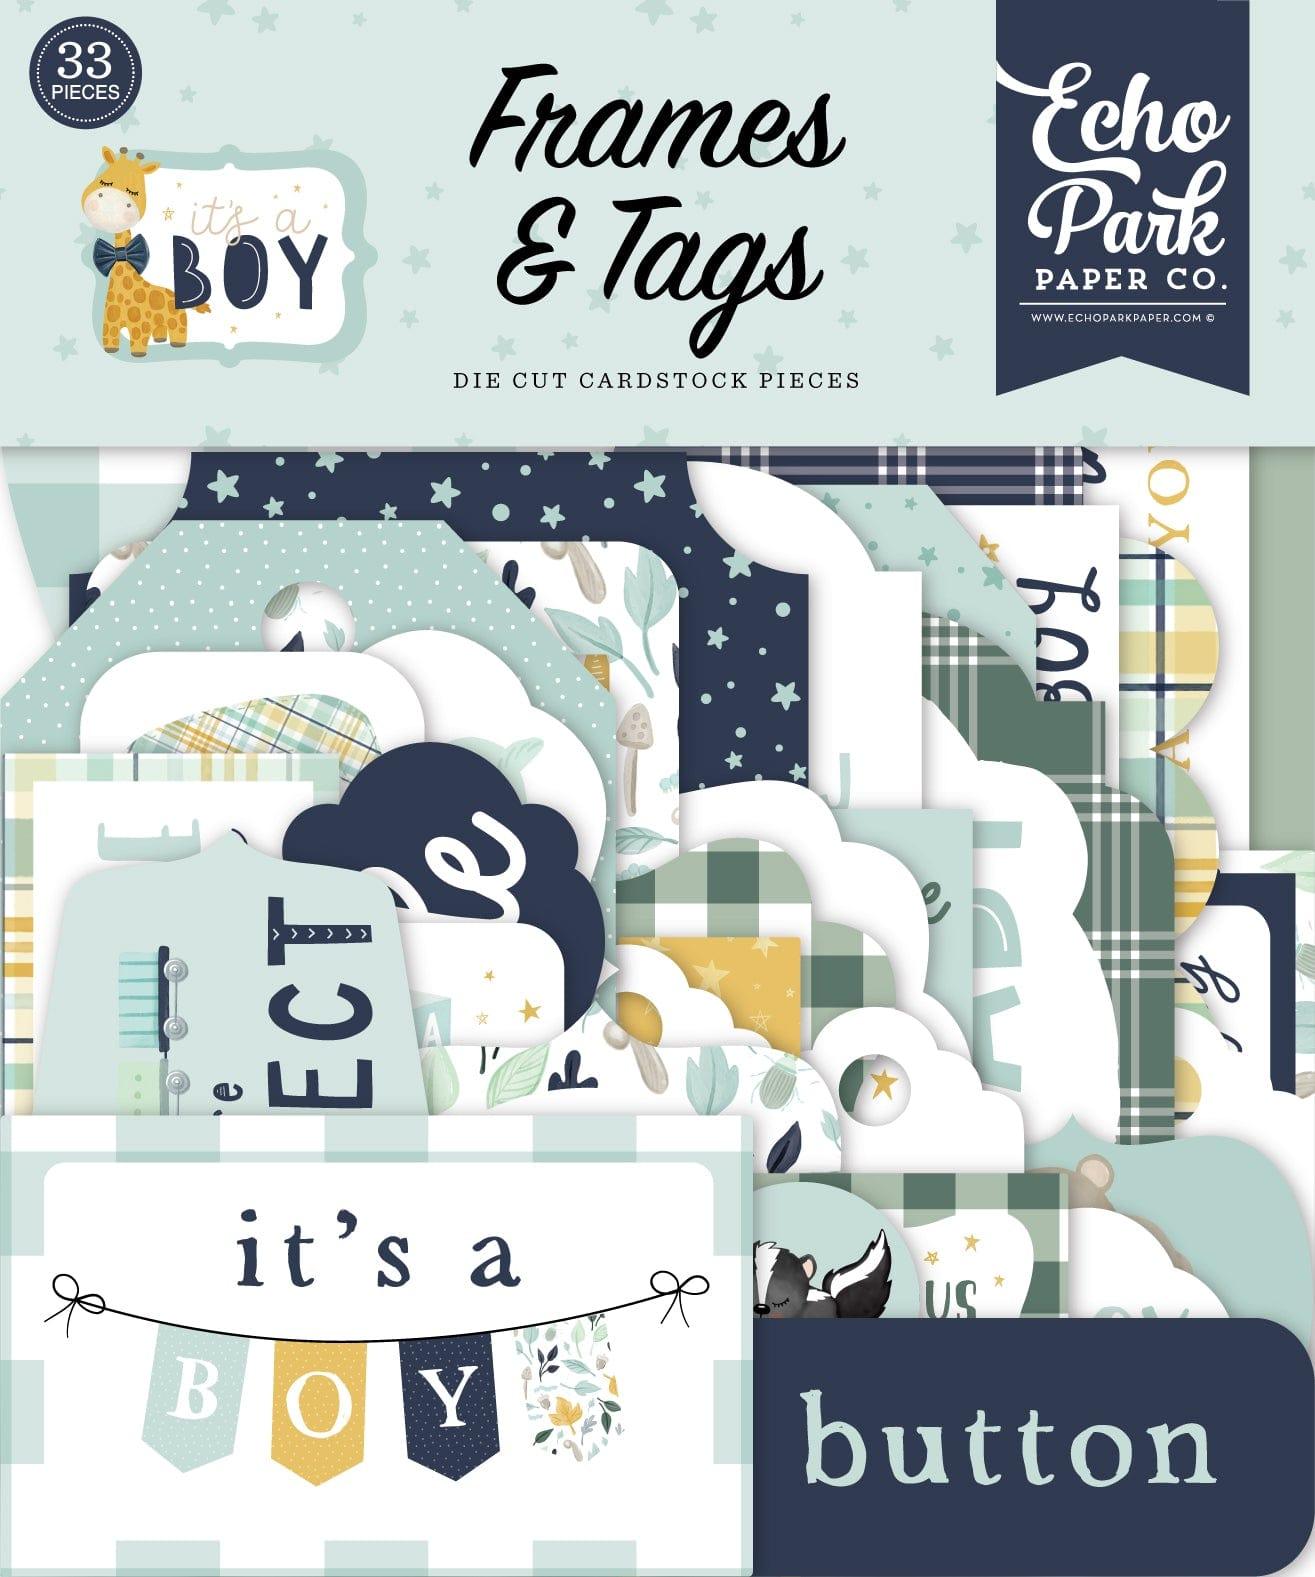 It's A Boy Collection 5 x 5 Scrapbook Tags & Frames Die Cuts by Echo Park Paper - Scrapbook Supply Companies